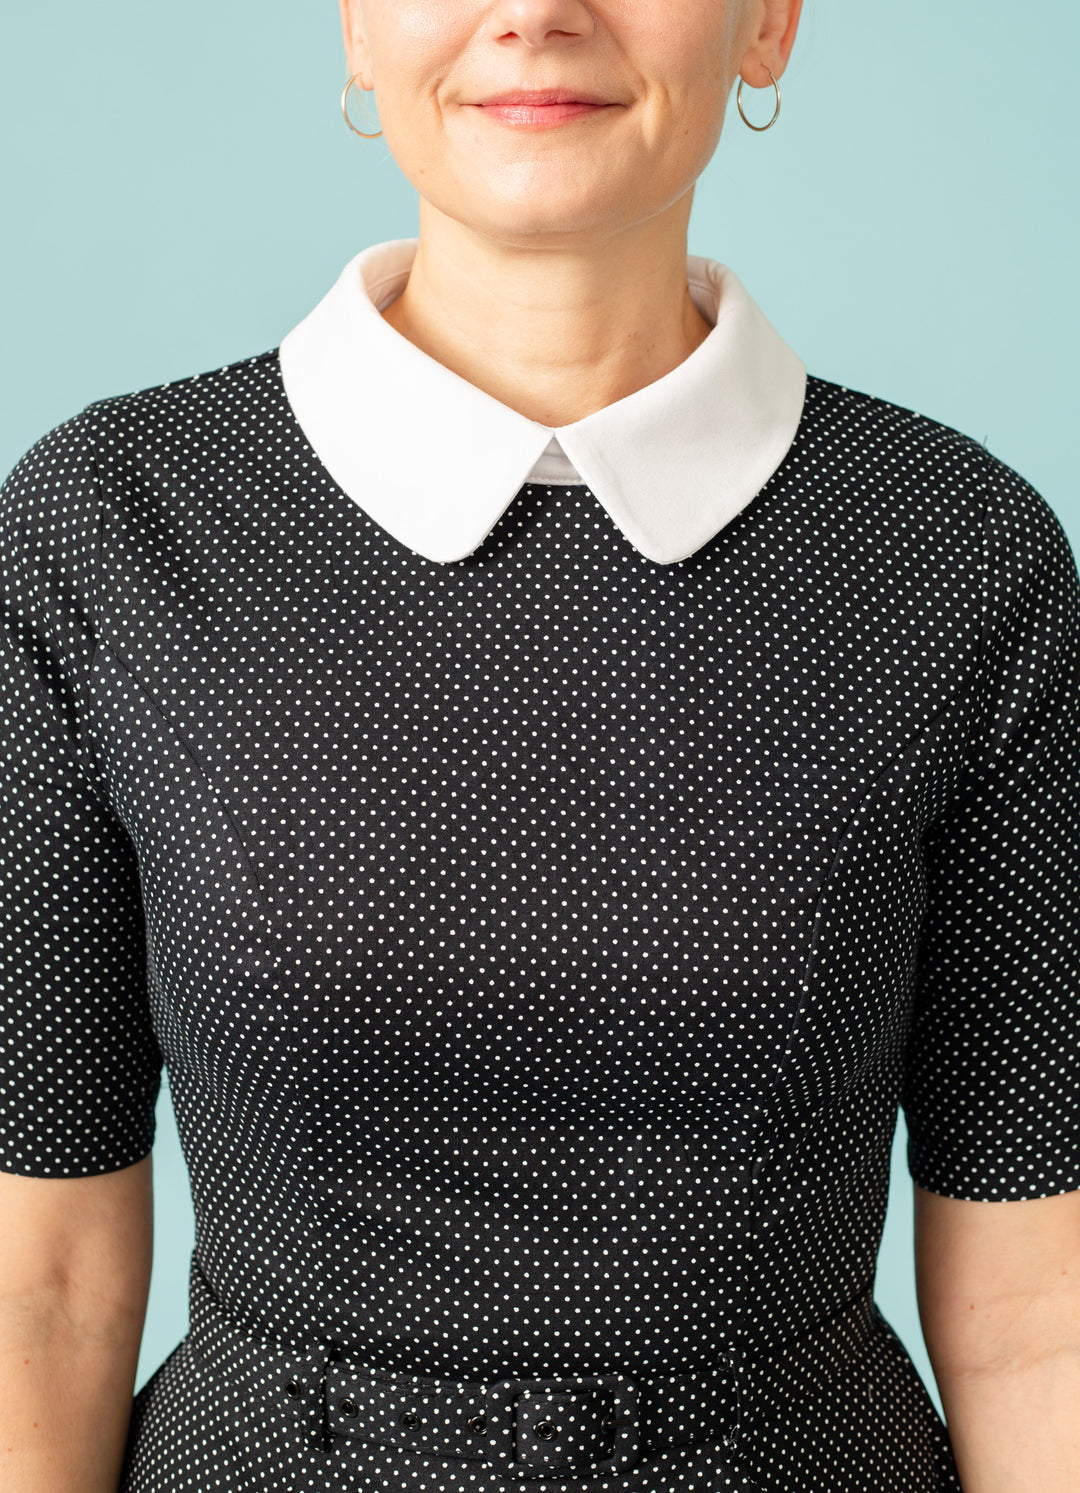 Dotted dress with three-quarter sleeves and collar - black/white